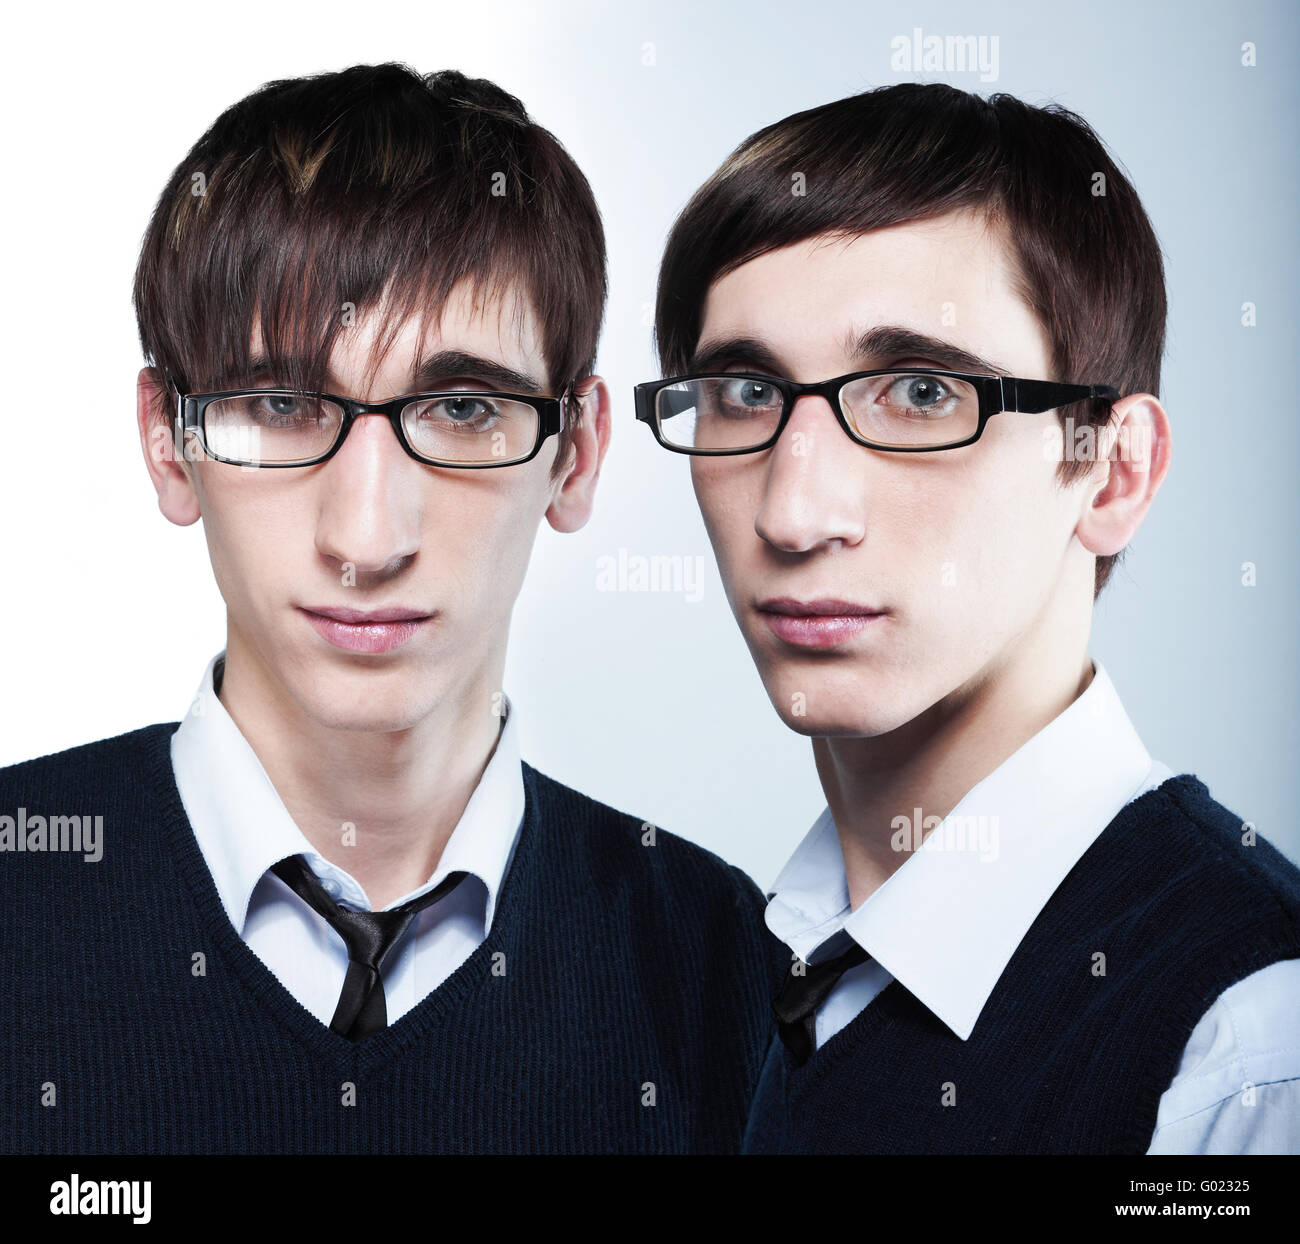 cute young twins with fashion haircuts wearing glasses Stock Photo